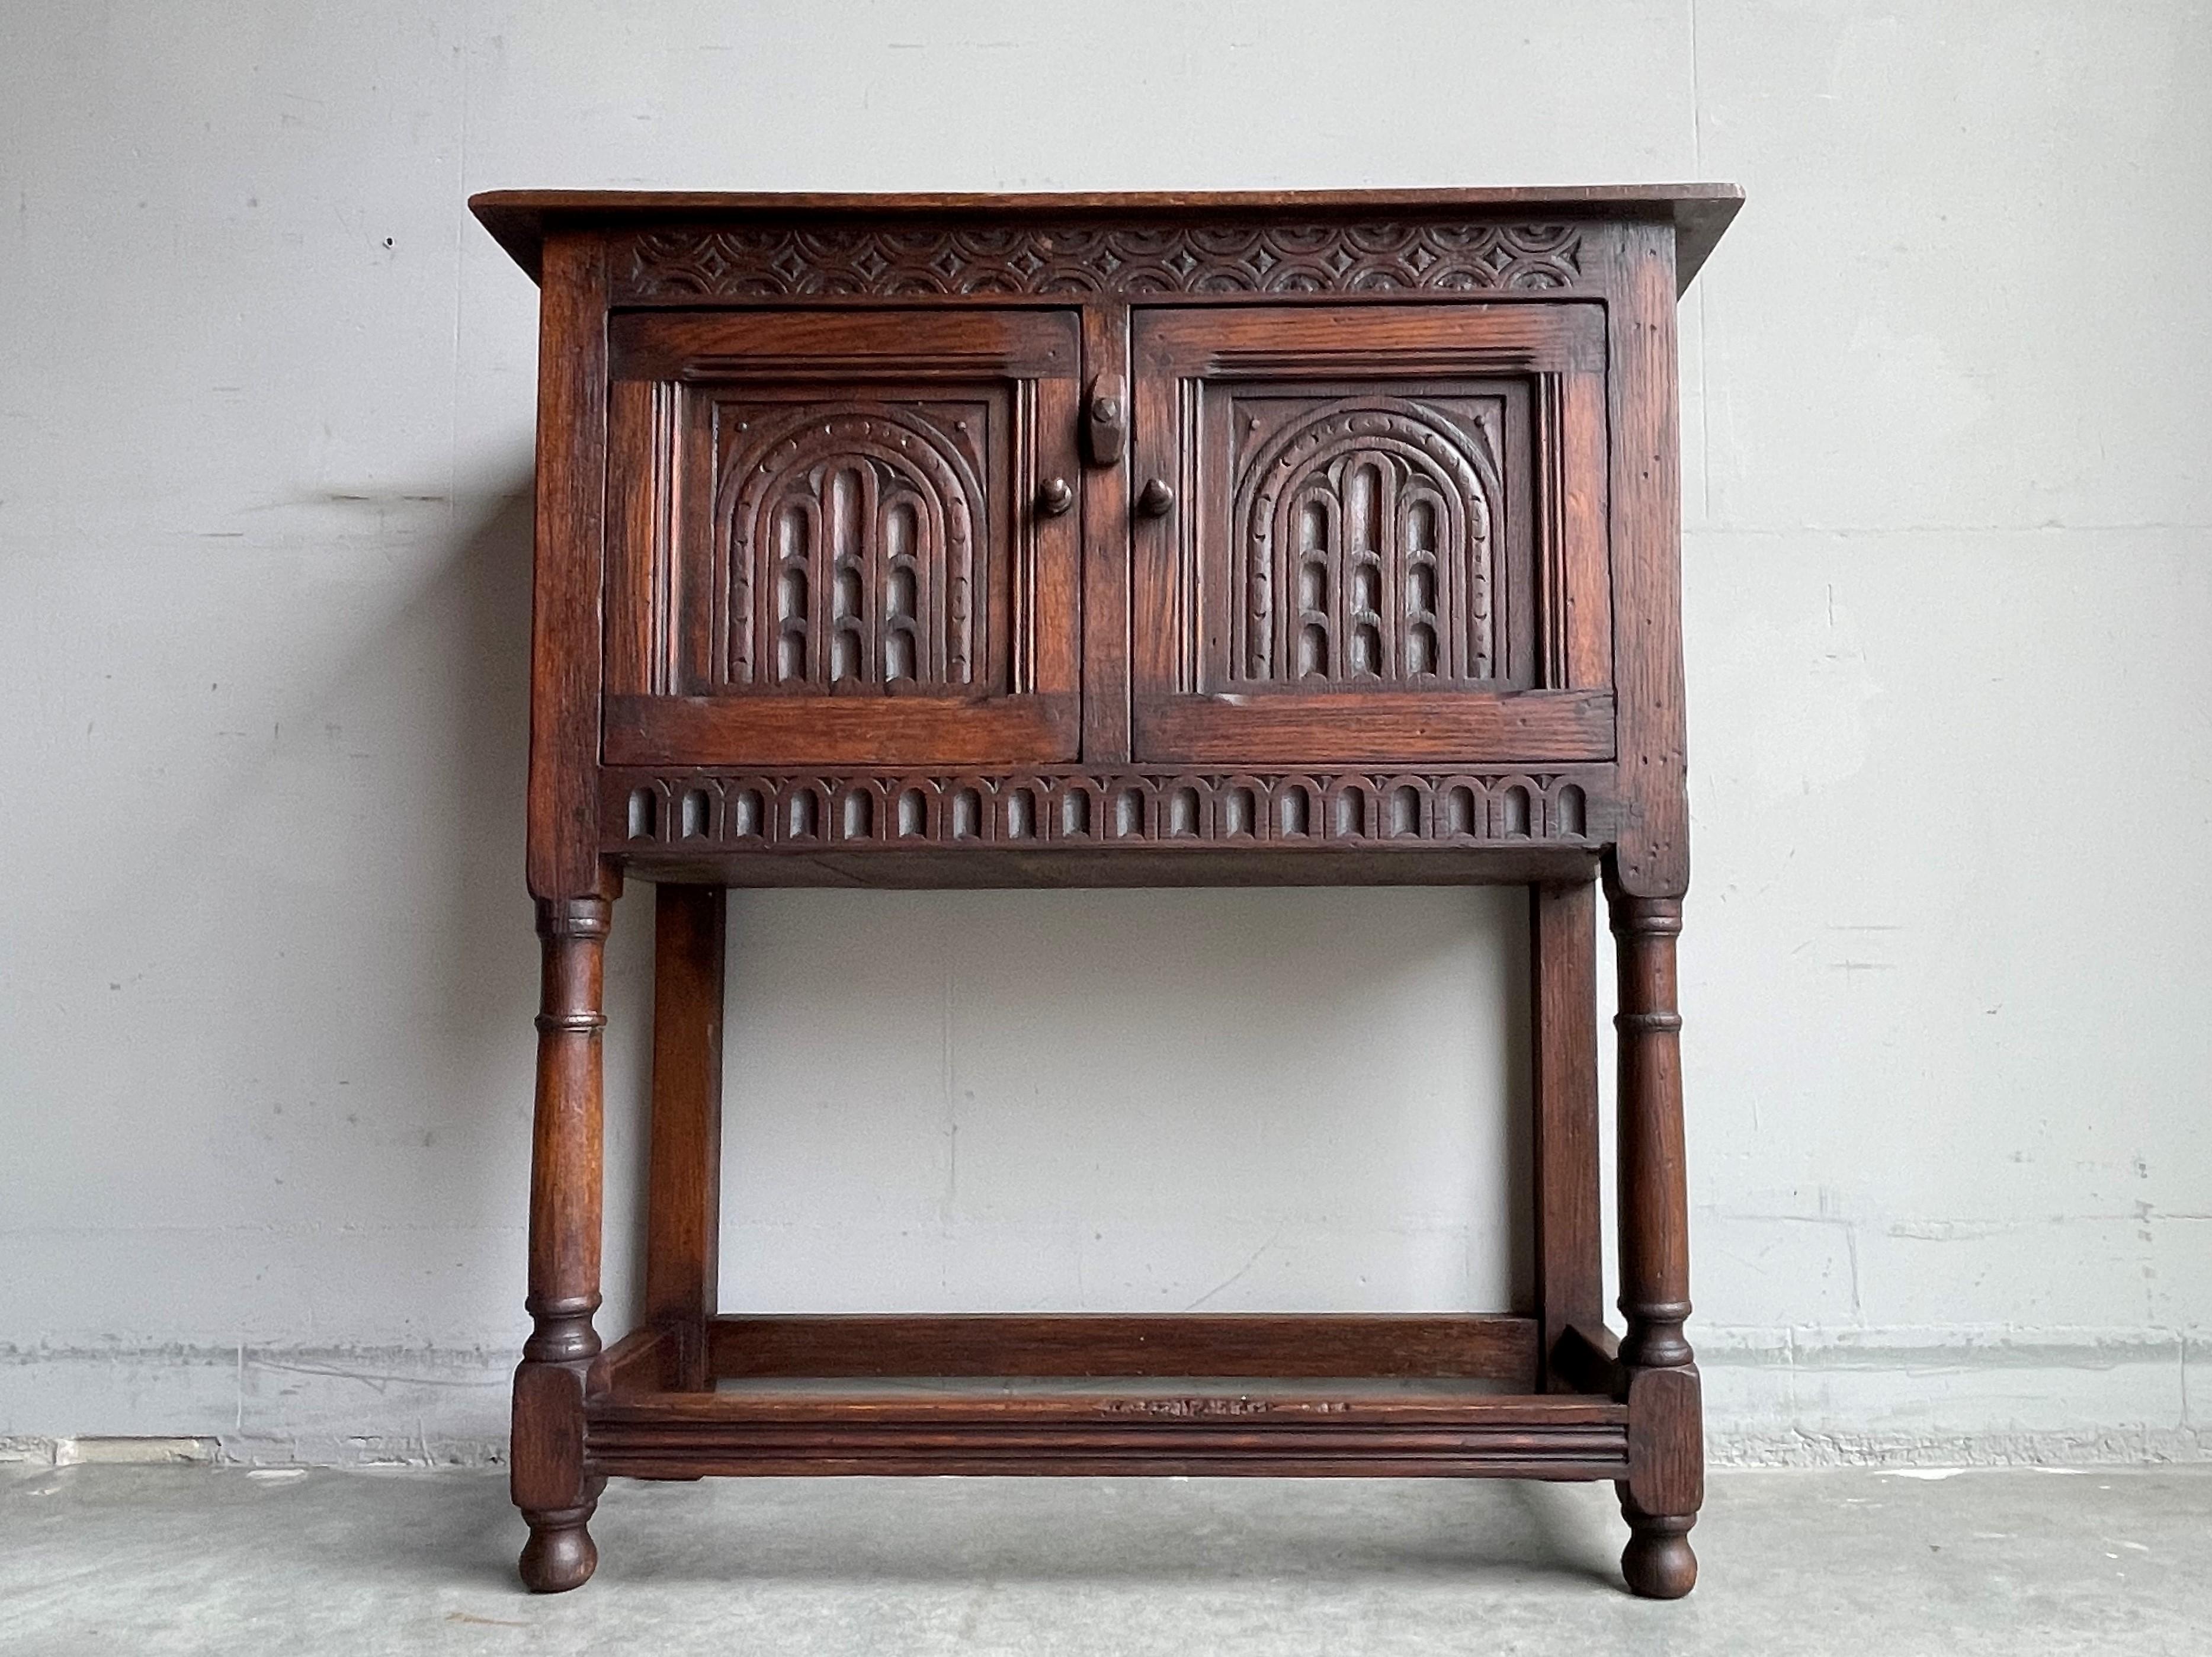 Beautiful and practical Size, hand carved Gothic cabinet with church window-like panels.

This antique Gothic Revival cabinet can be placed tight on your wall and thanks to its undeep design this medieval style beauty can be placed almost anywhere